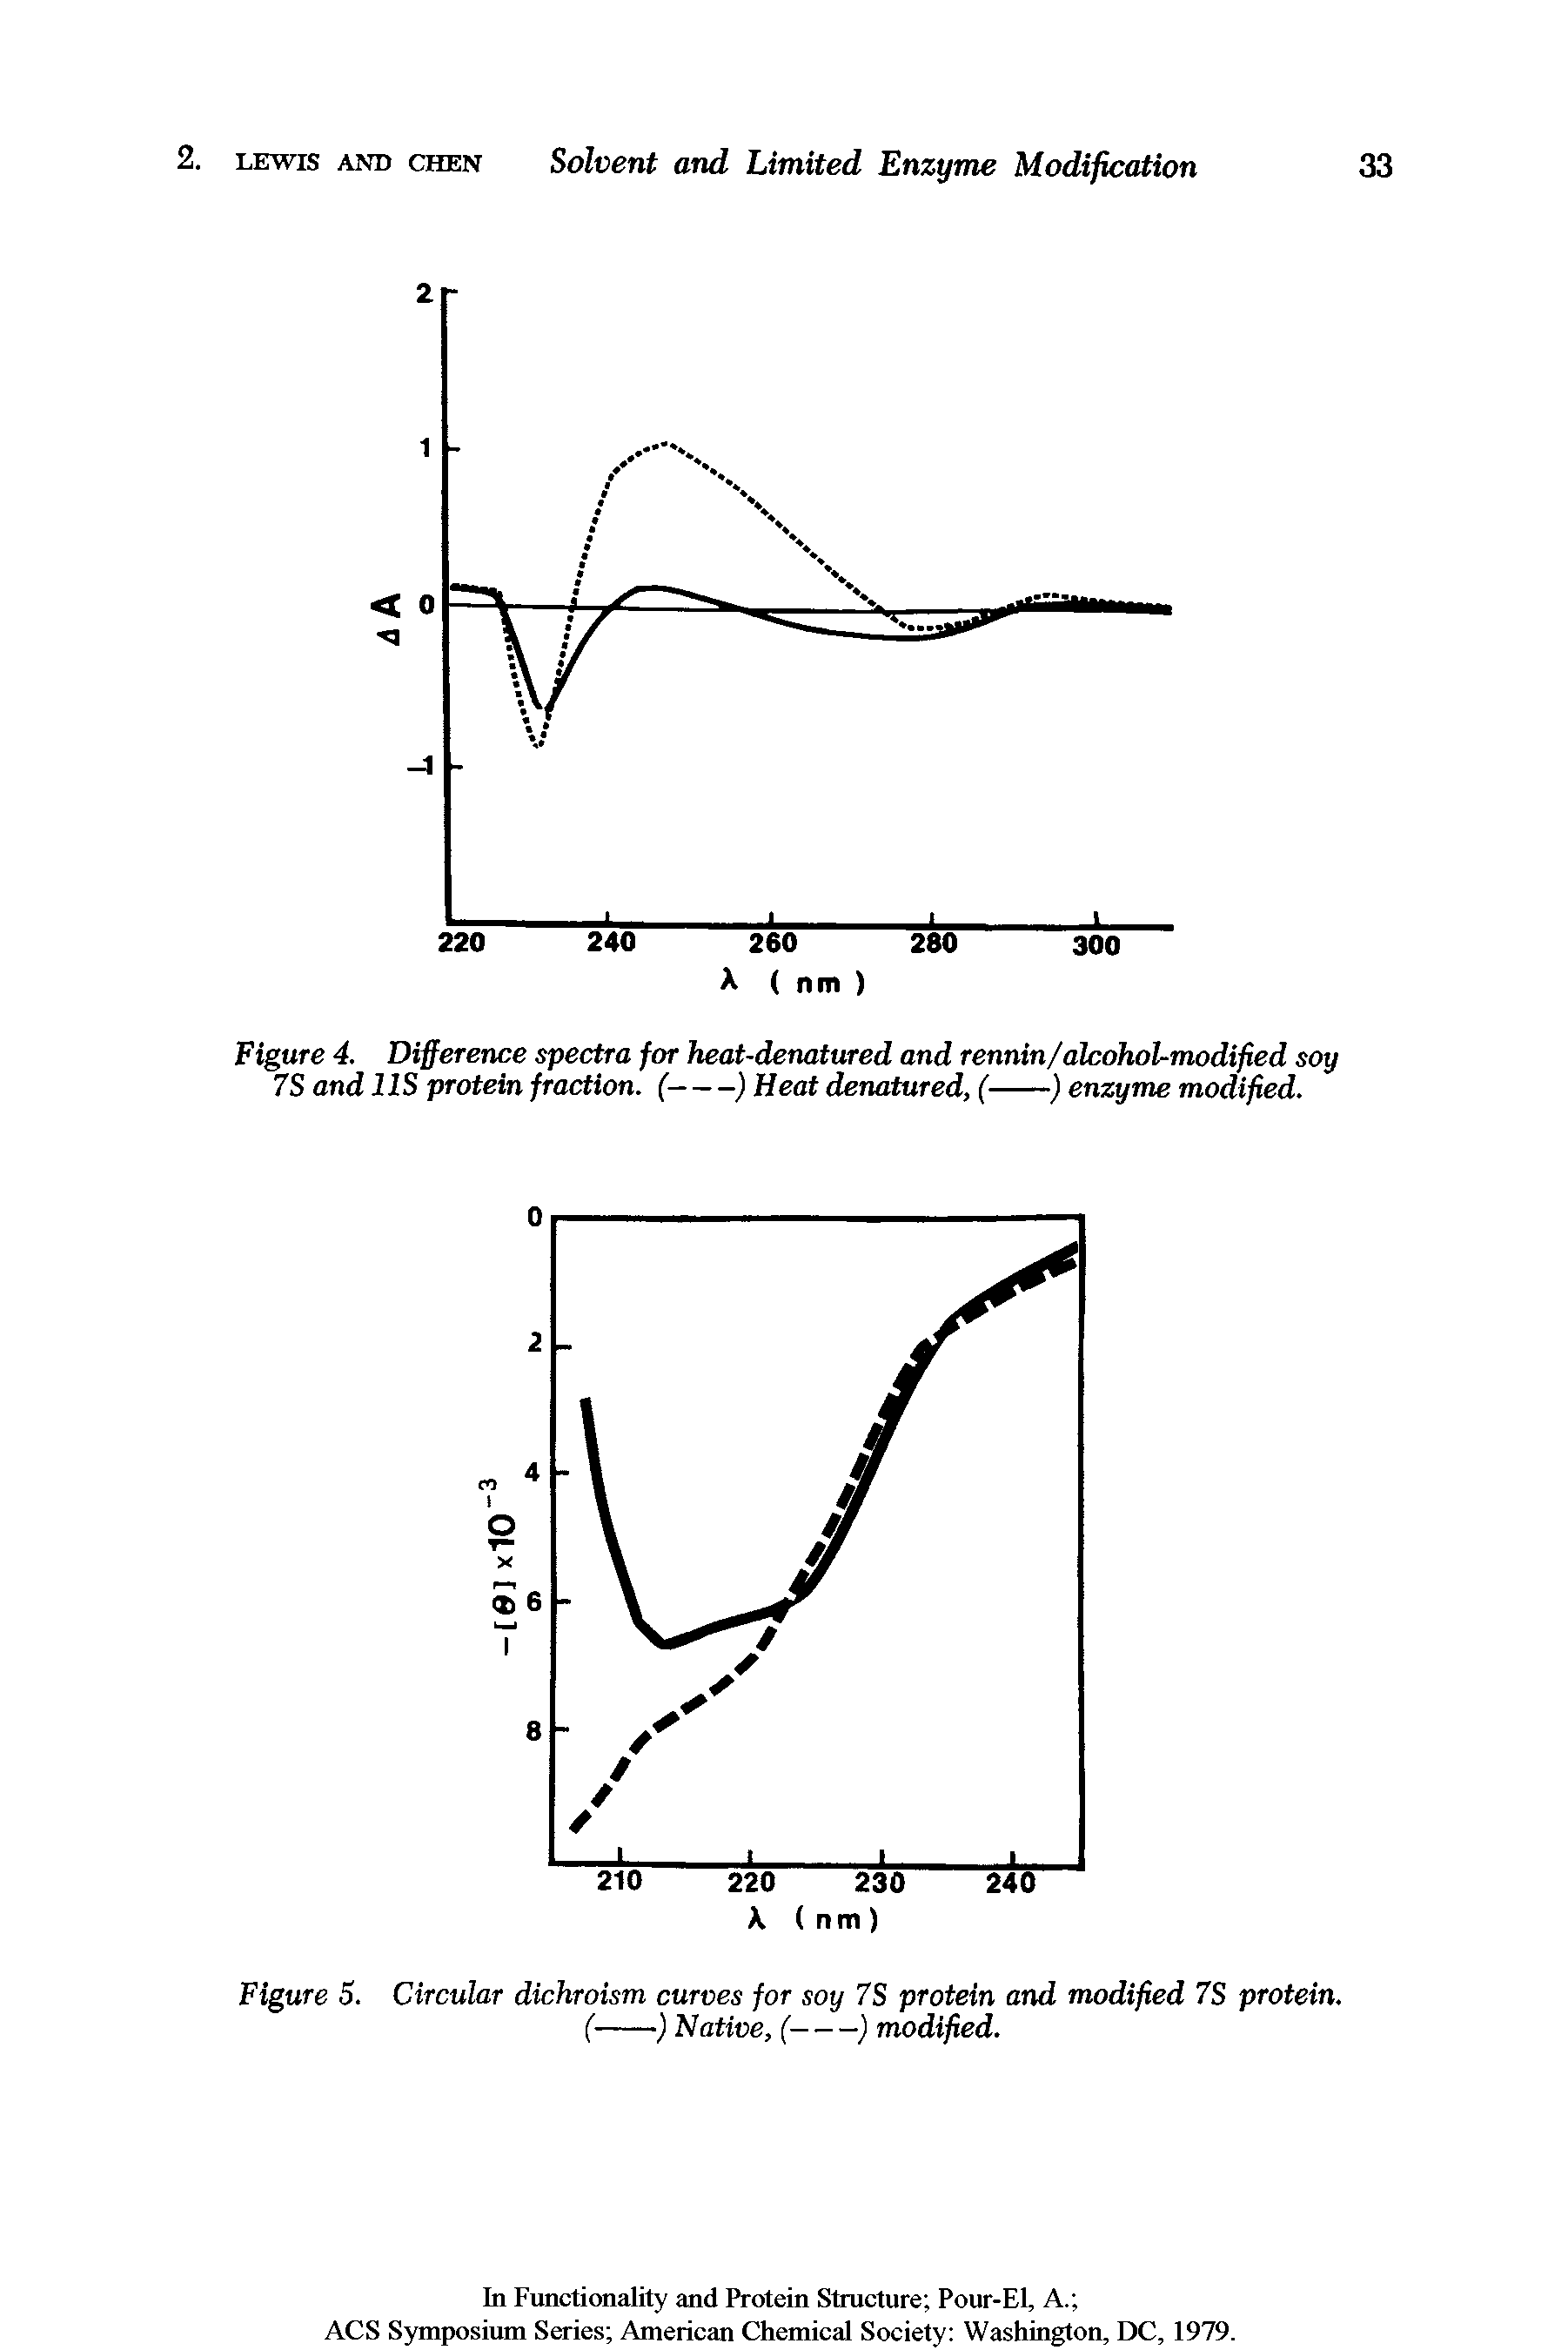 Figure 4. Difference spectra for heat-denatured and rennin/alcohol-modified soy 7S and 11S protein fraction. (-----) Heat denatured, (----) enzyme modified.